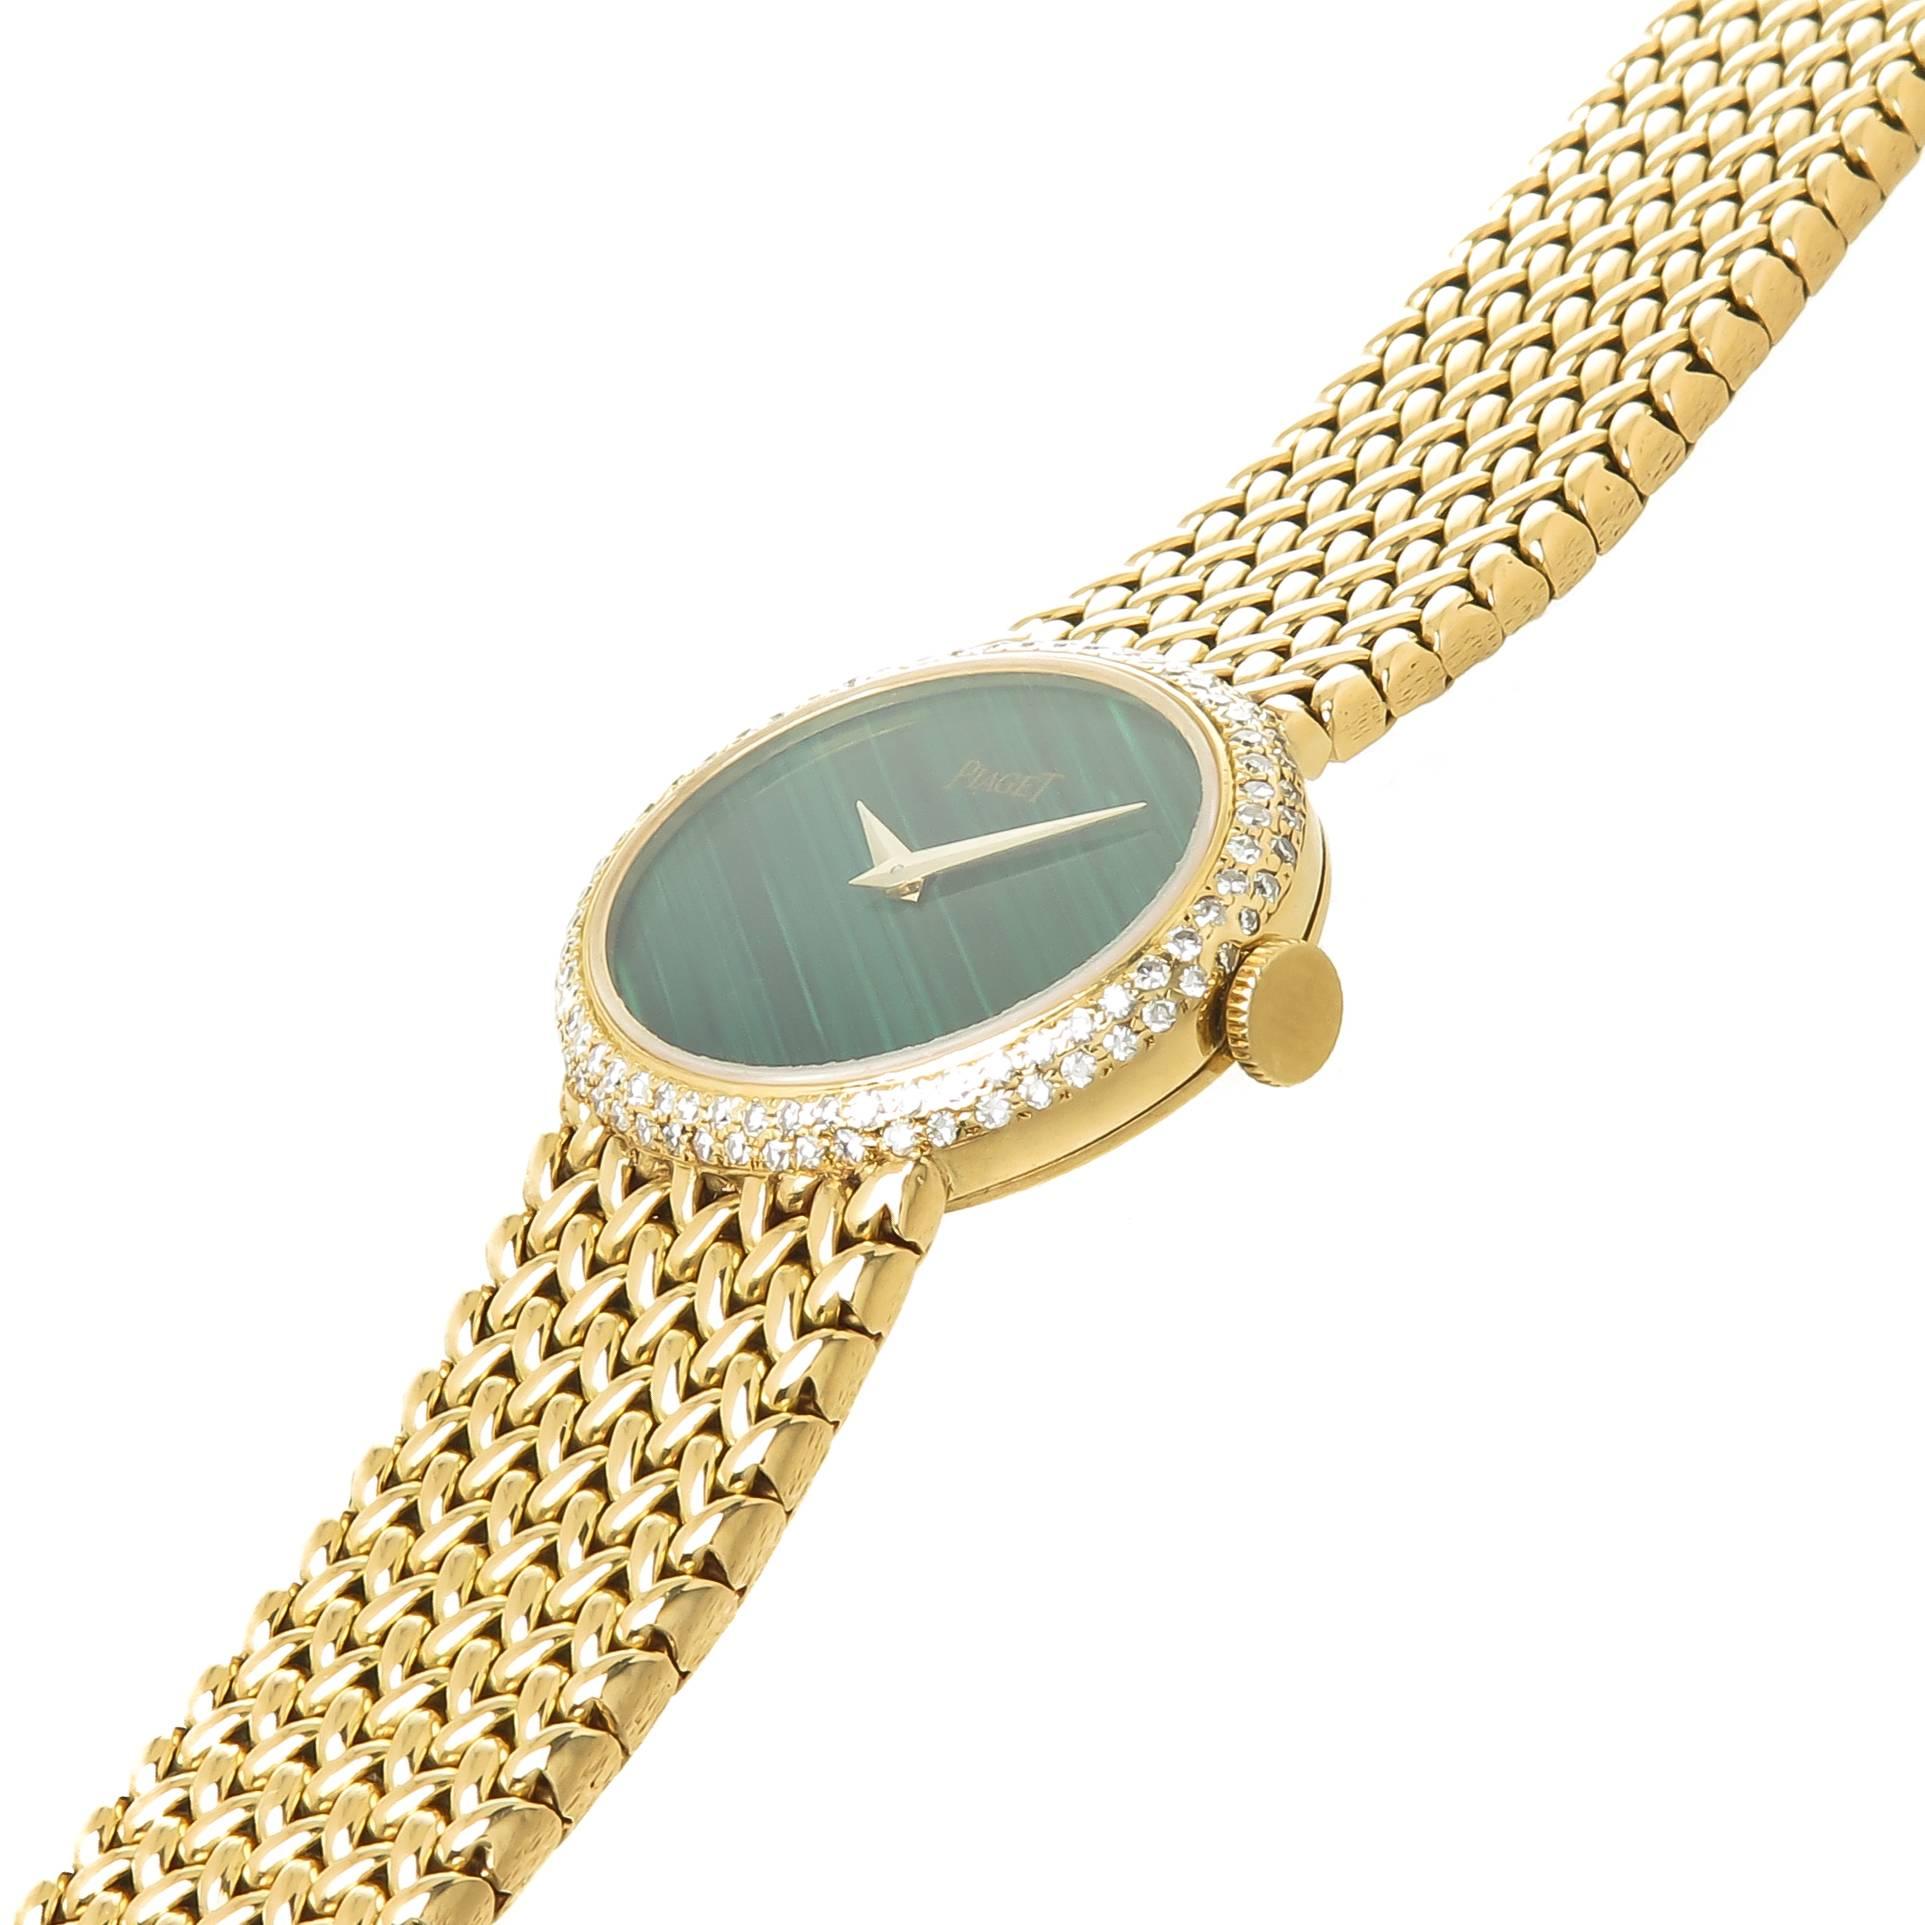 Circa 1970s Piaget Wrist Watch, 16 X 22 MM oval case with original Factory Double row Diamond Bezel totaling approximately 1 Carat. Mechanical, Manual wind 17 Jewel movement, Malachite Dial. 5/8 inch wide Piaget woven Bracelet. Total length 6 Inches